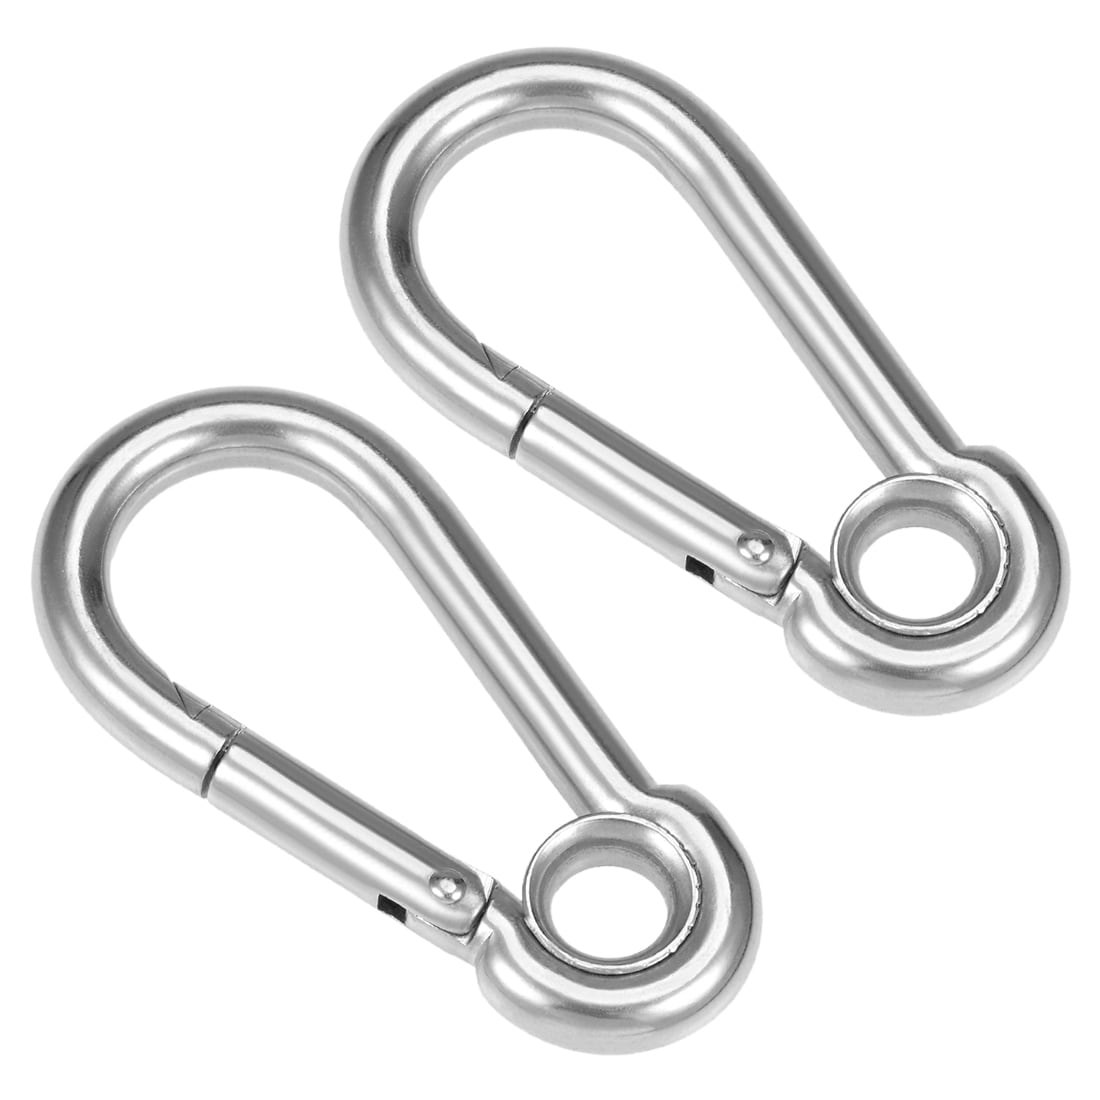 2.71/69mm Stainless Steel Carabiner Spring Snap Link Hook Clip Keychain 2  Pcs - Silver - Bed Bath & Beyond - 36915508